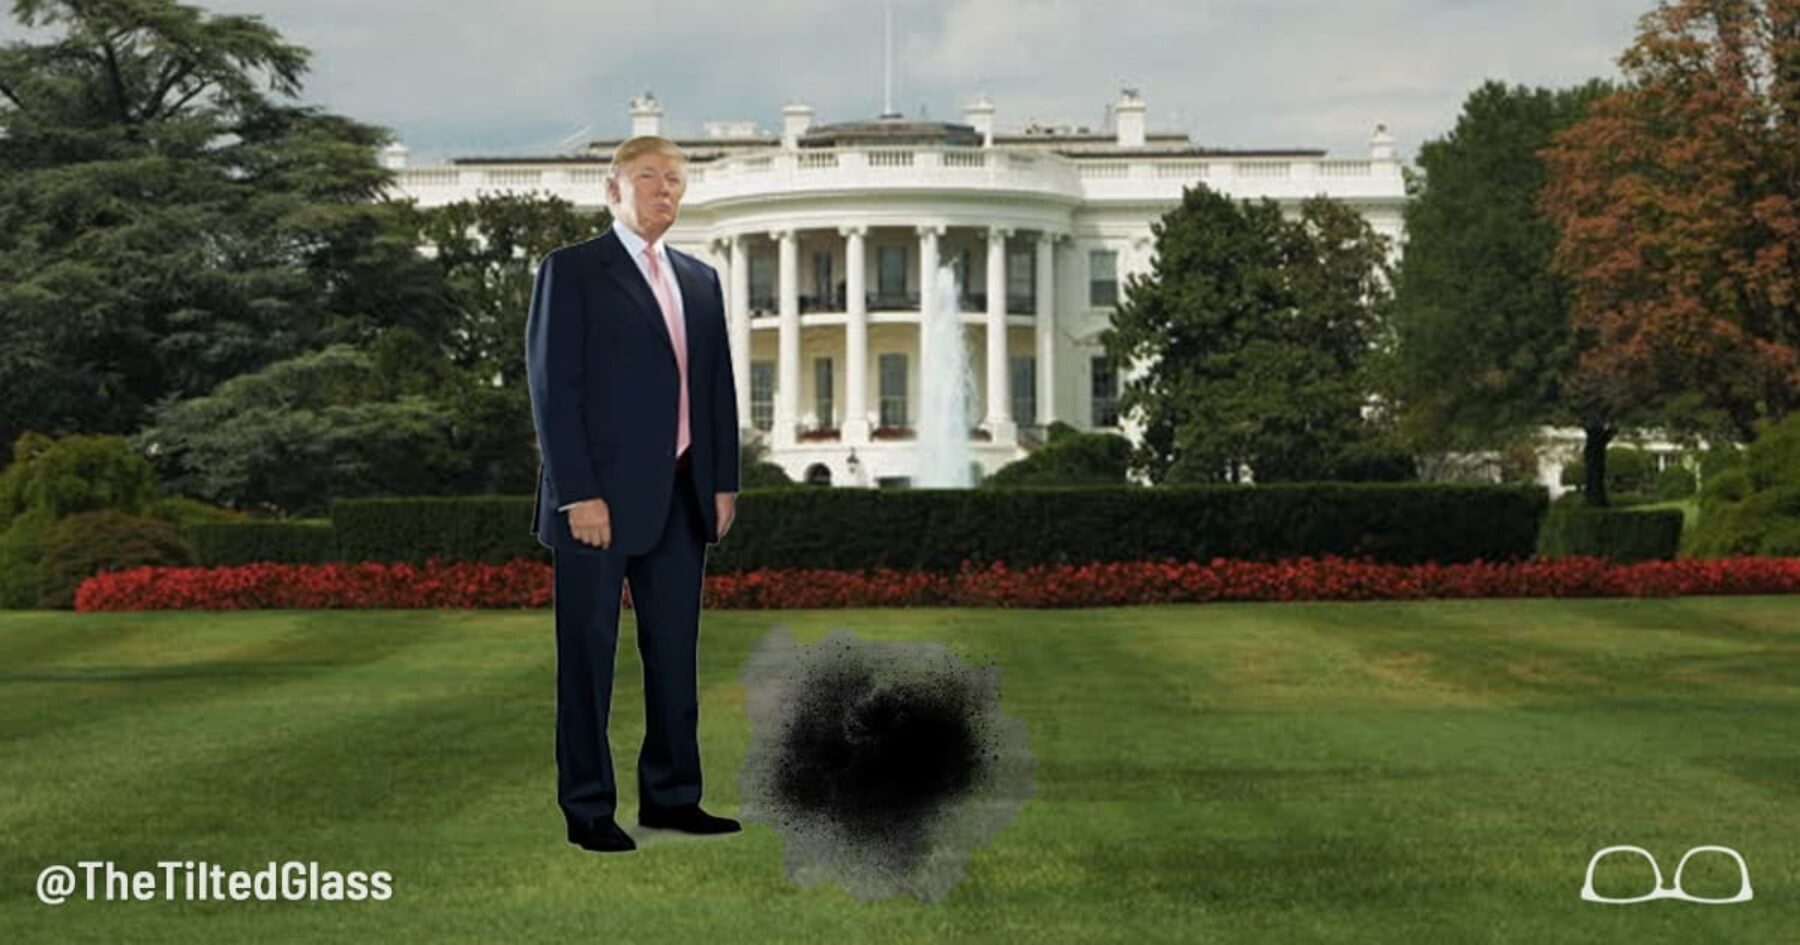 A-Hole Appears on White House Lawn